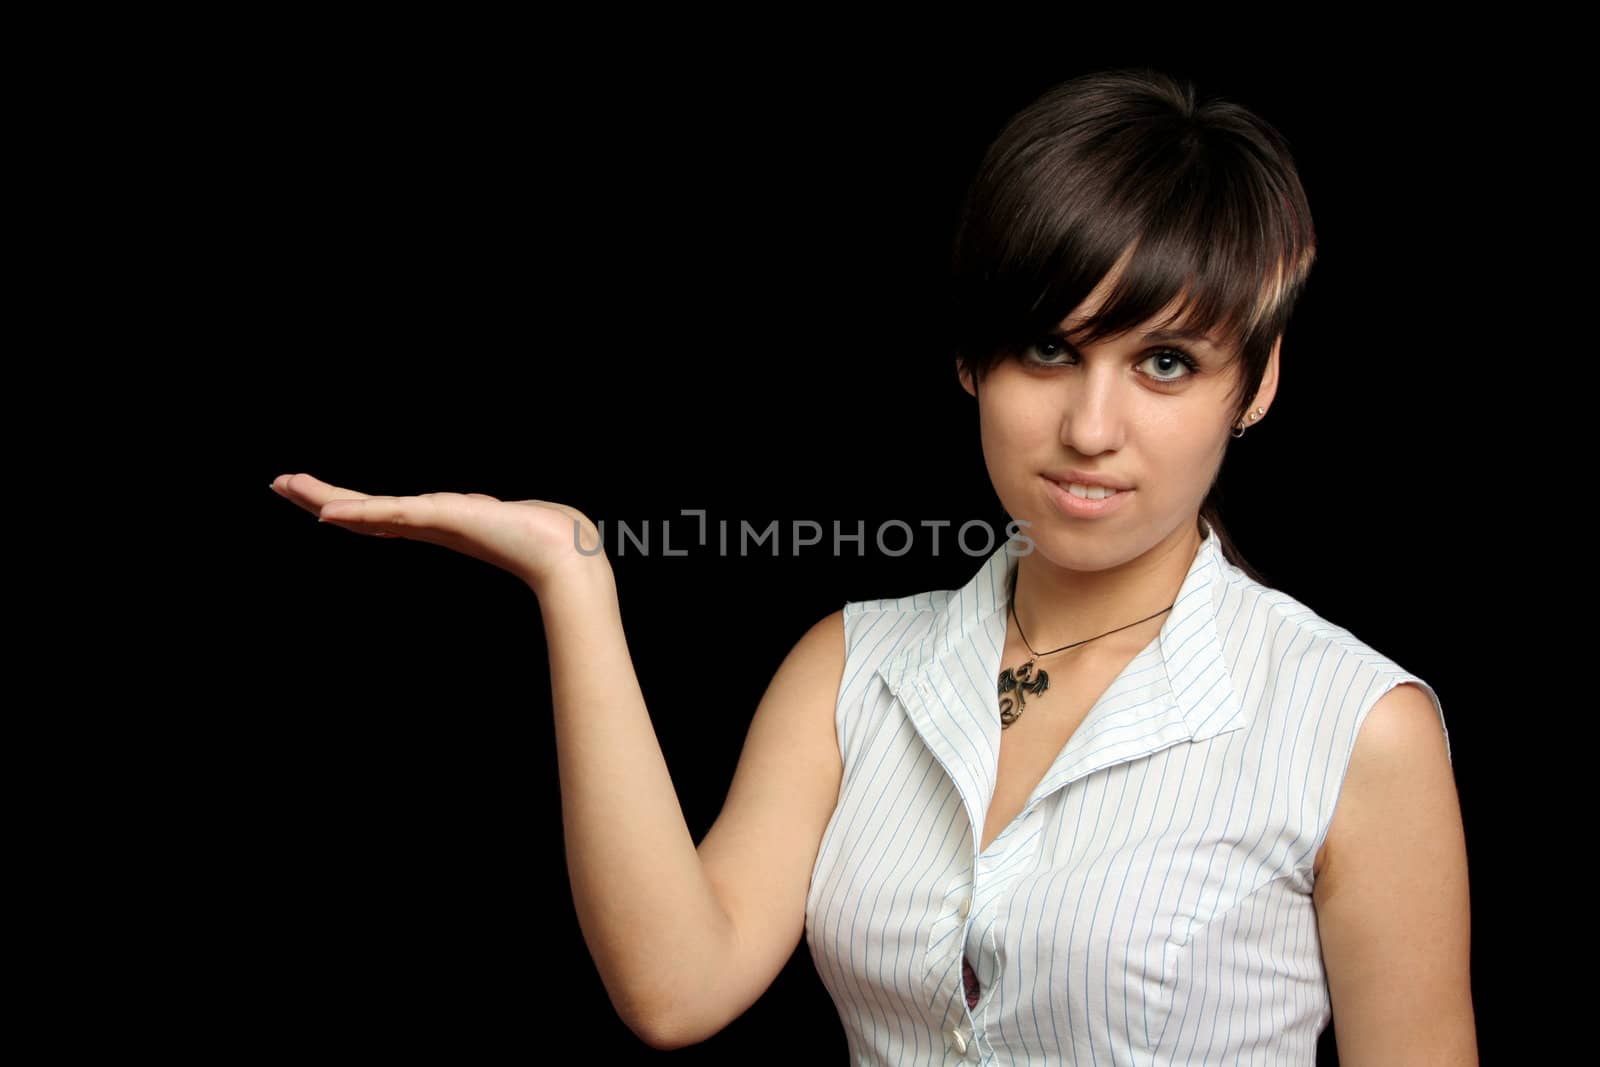 The young girl holds something in a hand, is isolated on a black background